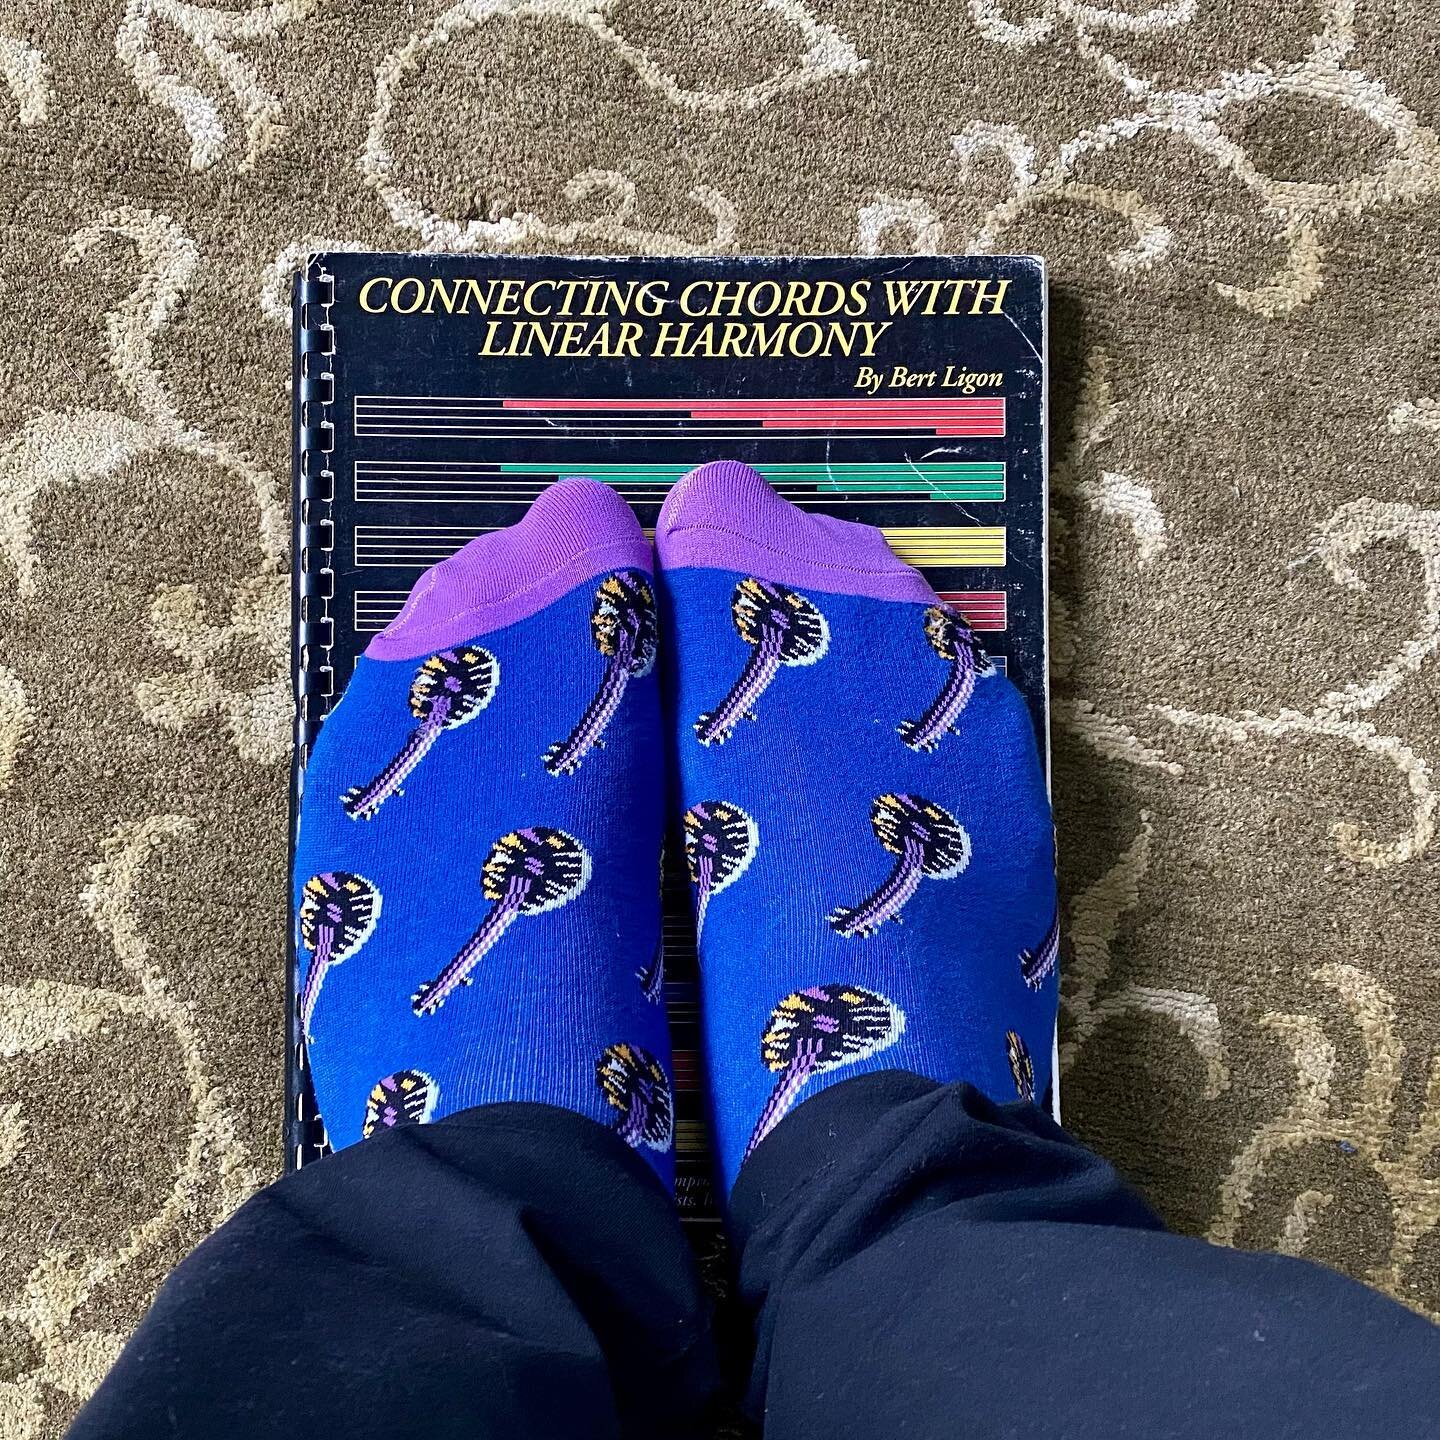 No better way to cool off from an epic weekend than in a pair of @tonytrischka banjo socks and diving straight into this Bert Ligon book.  Huge thanks to the entire faculty that made this Banjo Summit Online such a success and to all the 100+ student